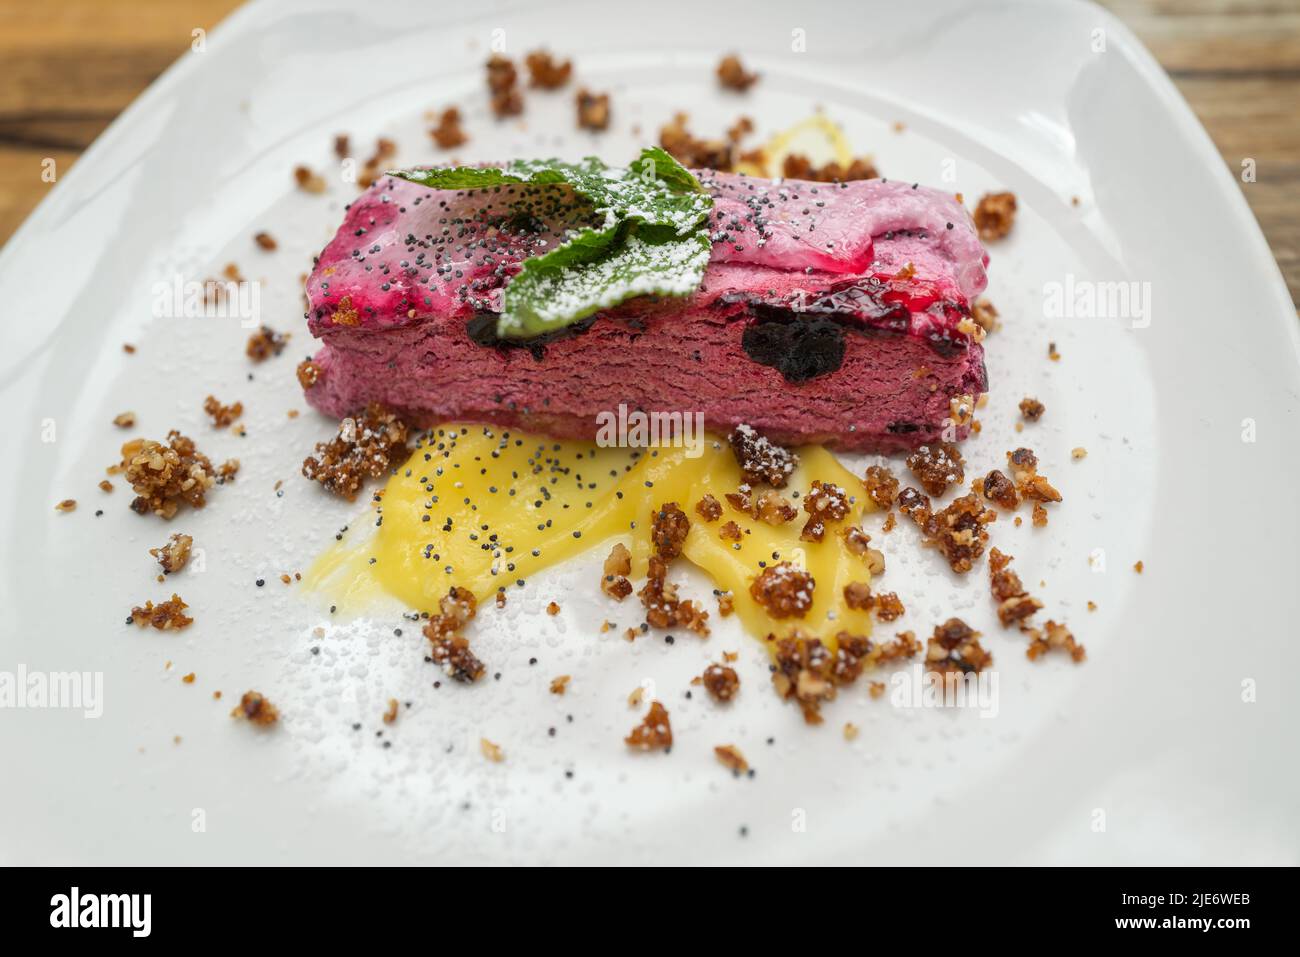 Blackcurrant mousse on a biscuit base with lemon curd and caramelised pecan crumb on a white plate. Stock Photo